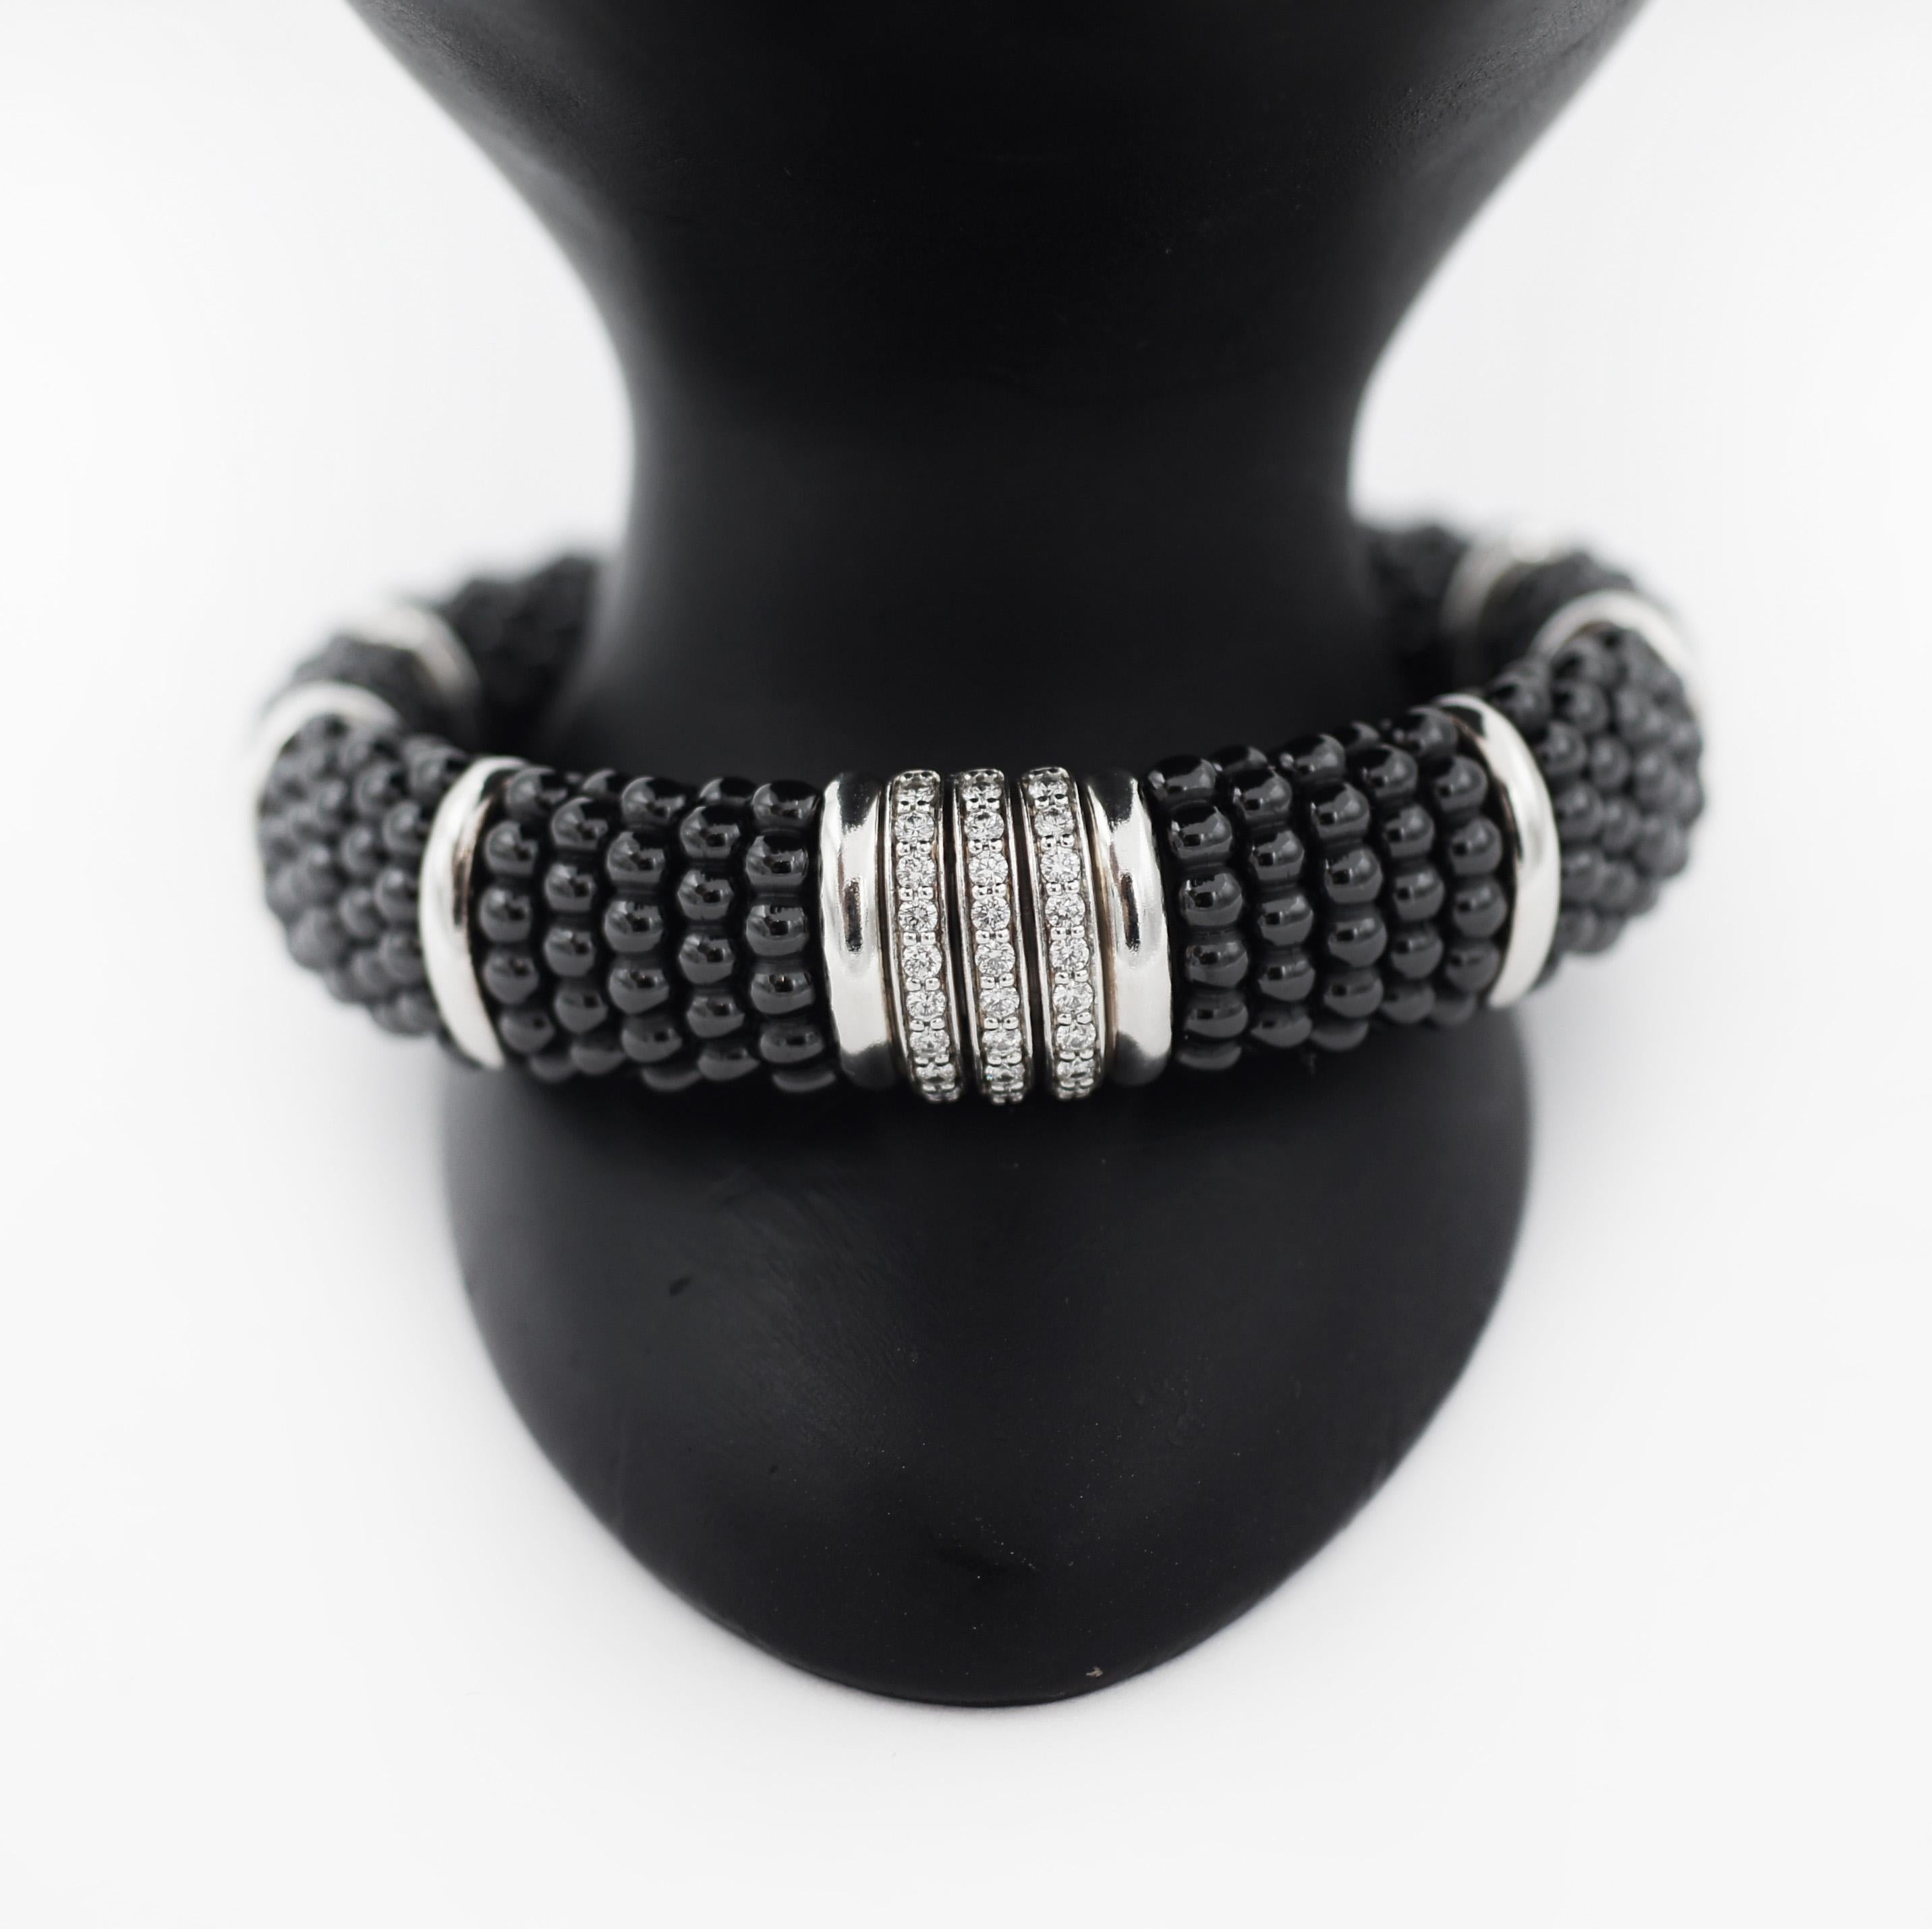 Beautiful Black Caviar diamond link bracelet by LAGOS.
Polished sterling silver and black ceramic make this bracelet stand out with accented and smooth station links and 3 white diamond pavé links.
Alternating links and Caviar beading.
Approximately